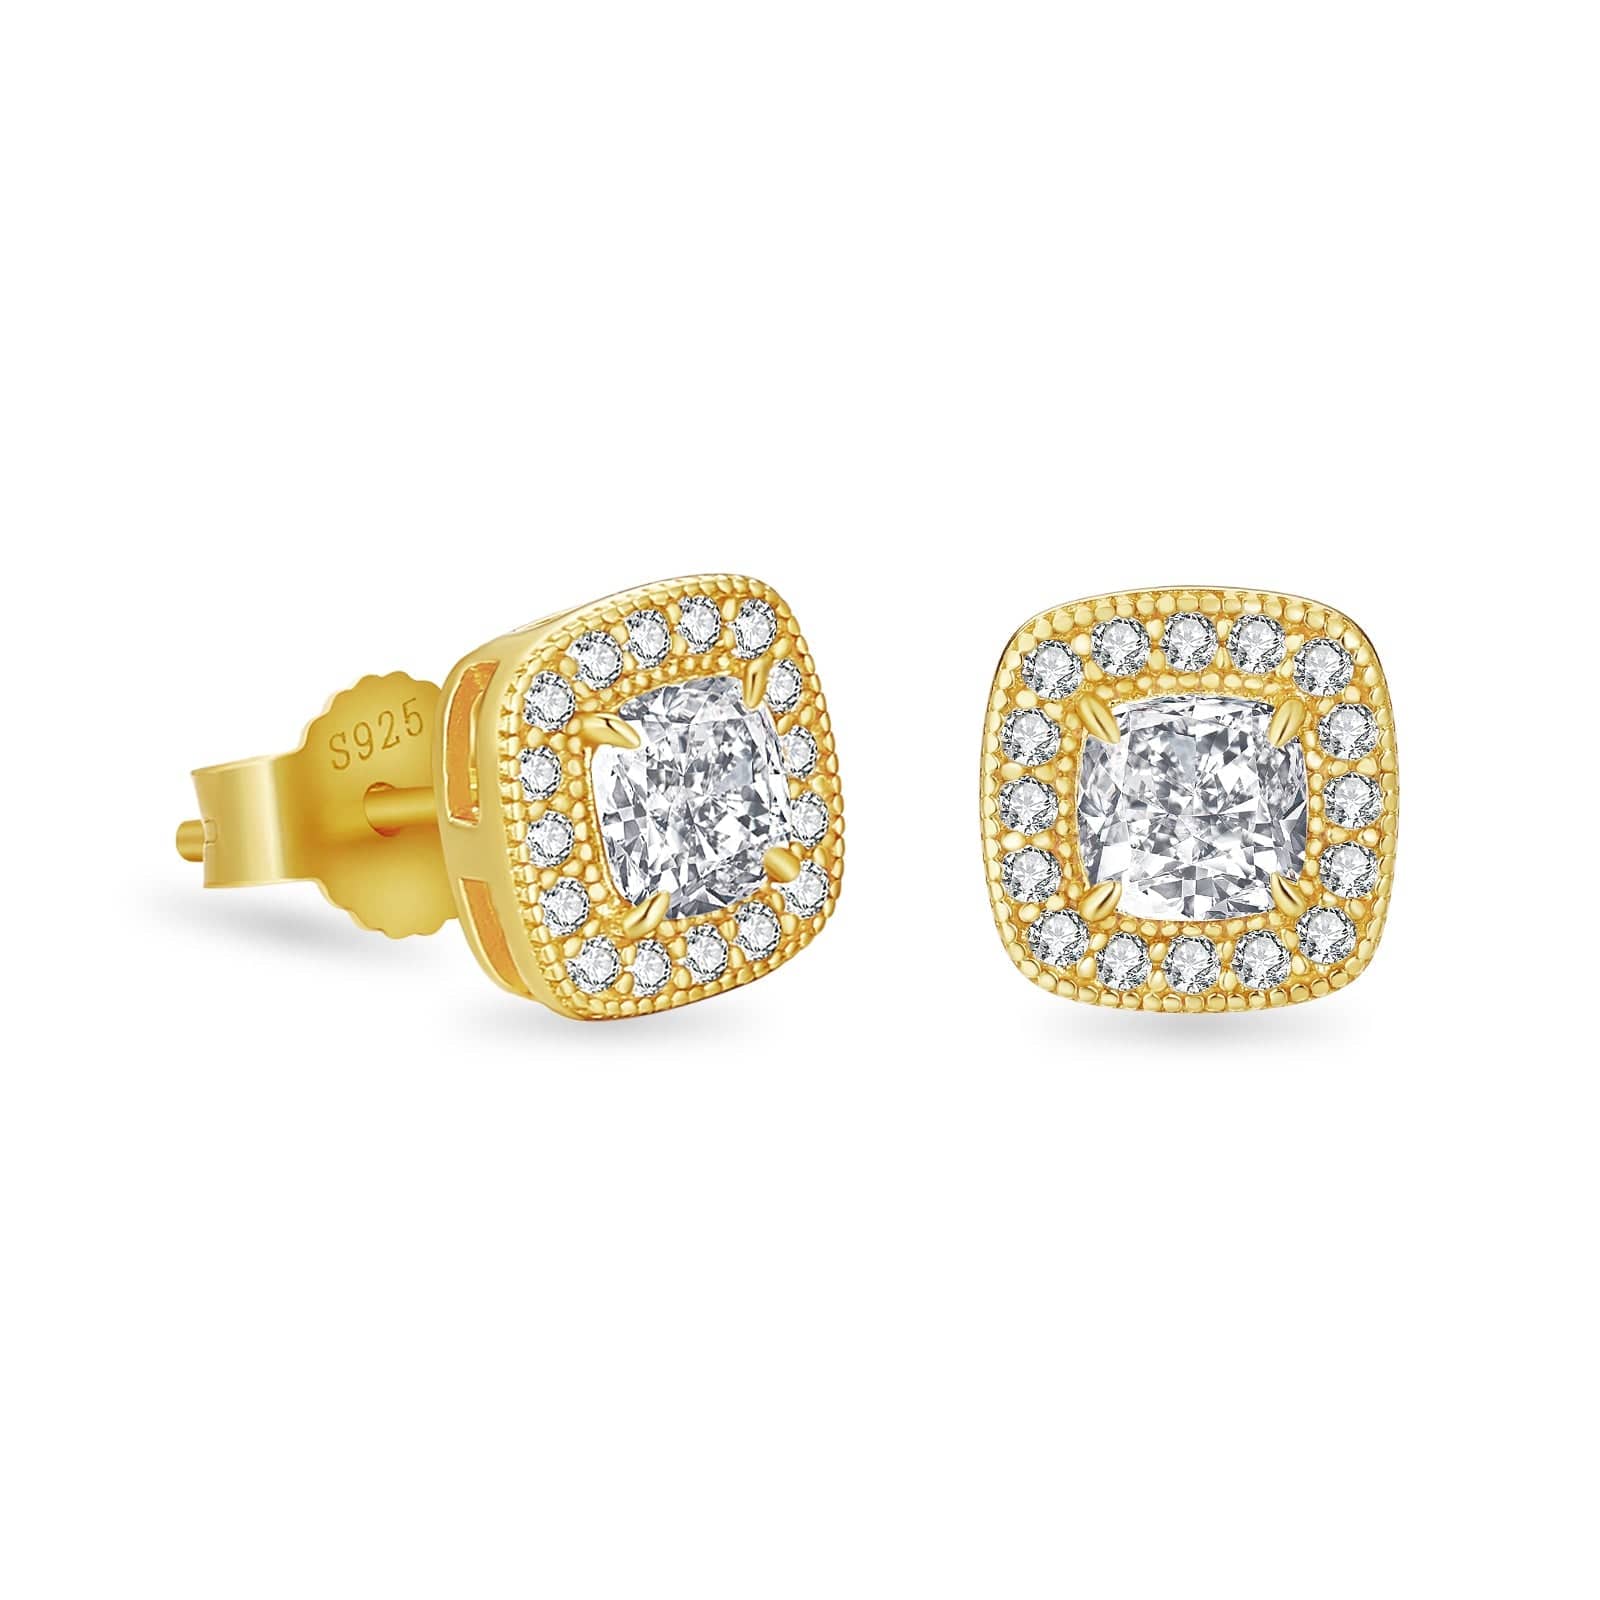 Iced Stud Earrings CZ Stone for Men and Women in 14K Gold / White Gold